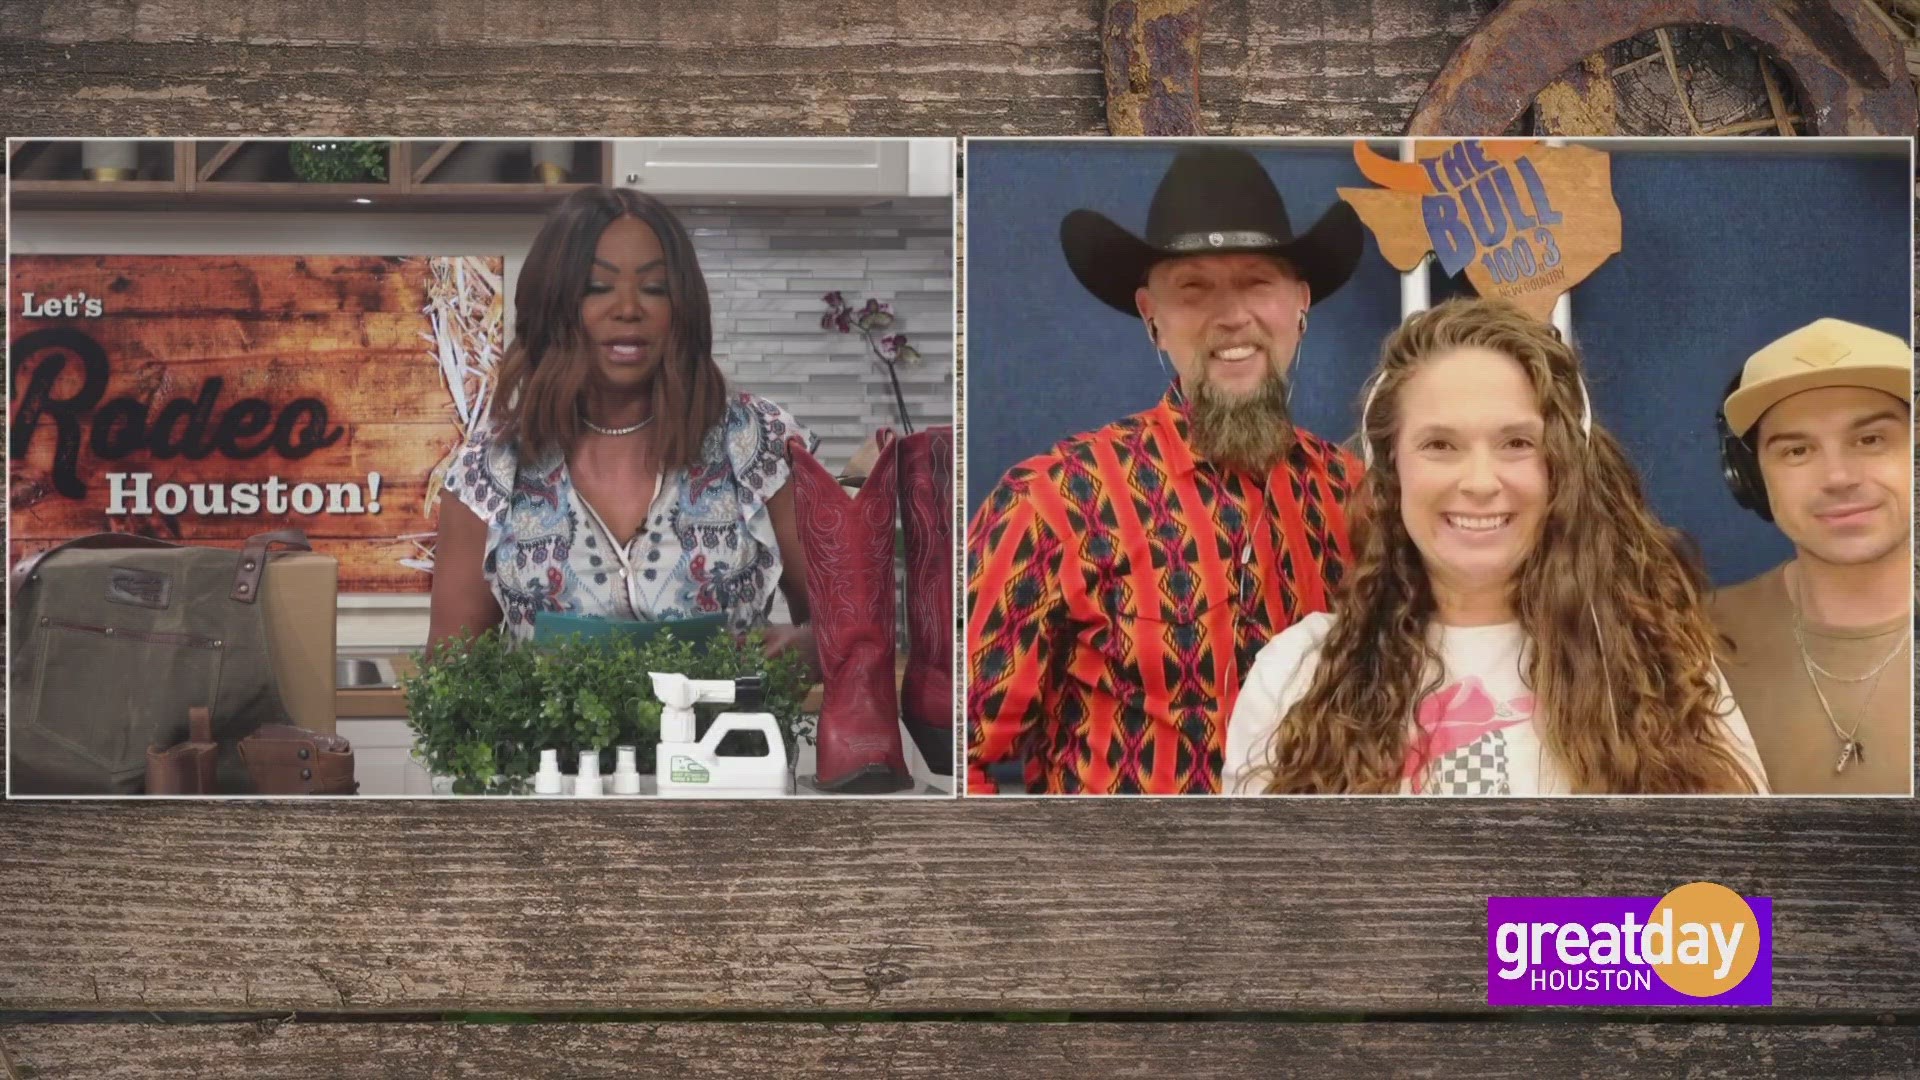 George, Mo, and Erik taste-test exotic delicacies, plus how to get into the rodeo for free!